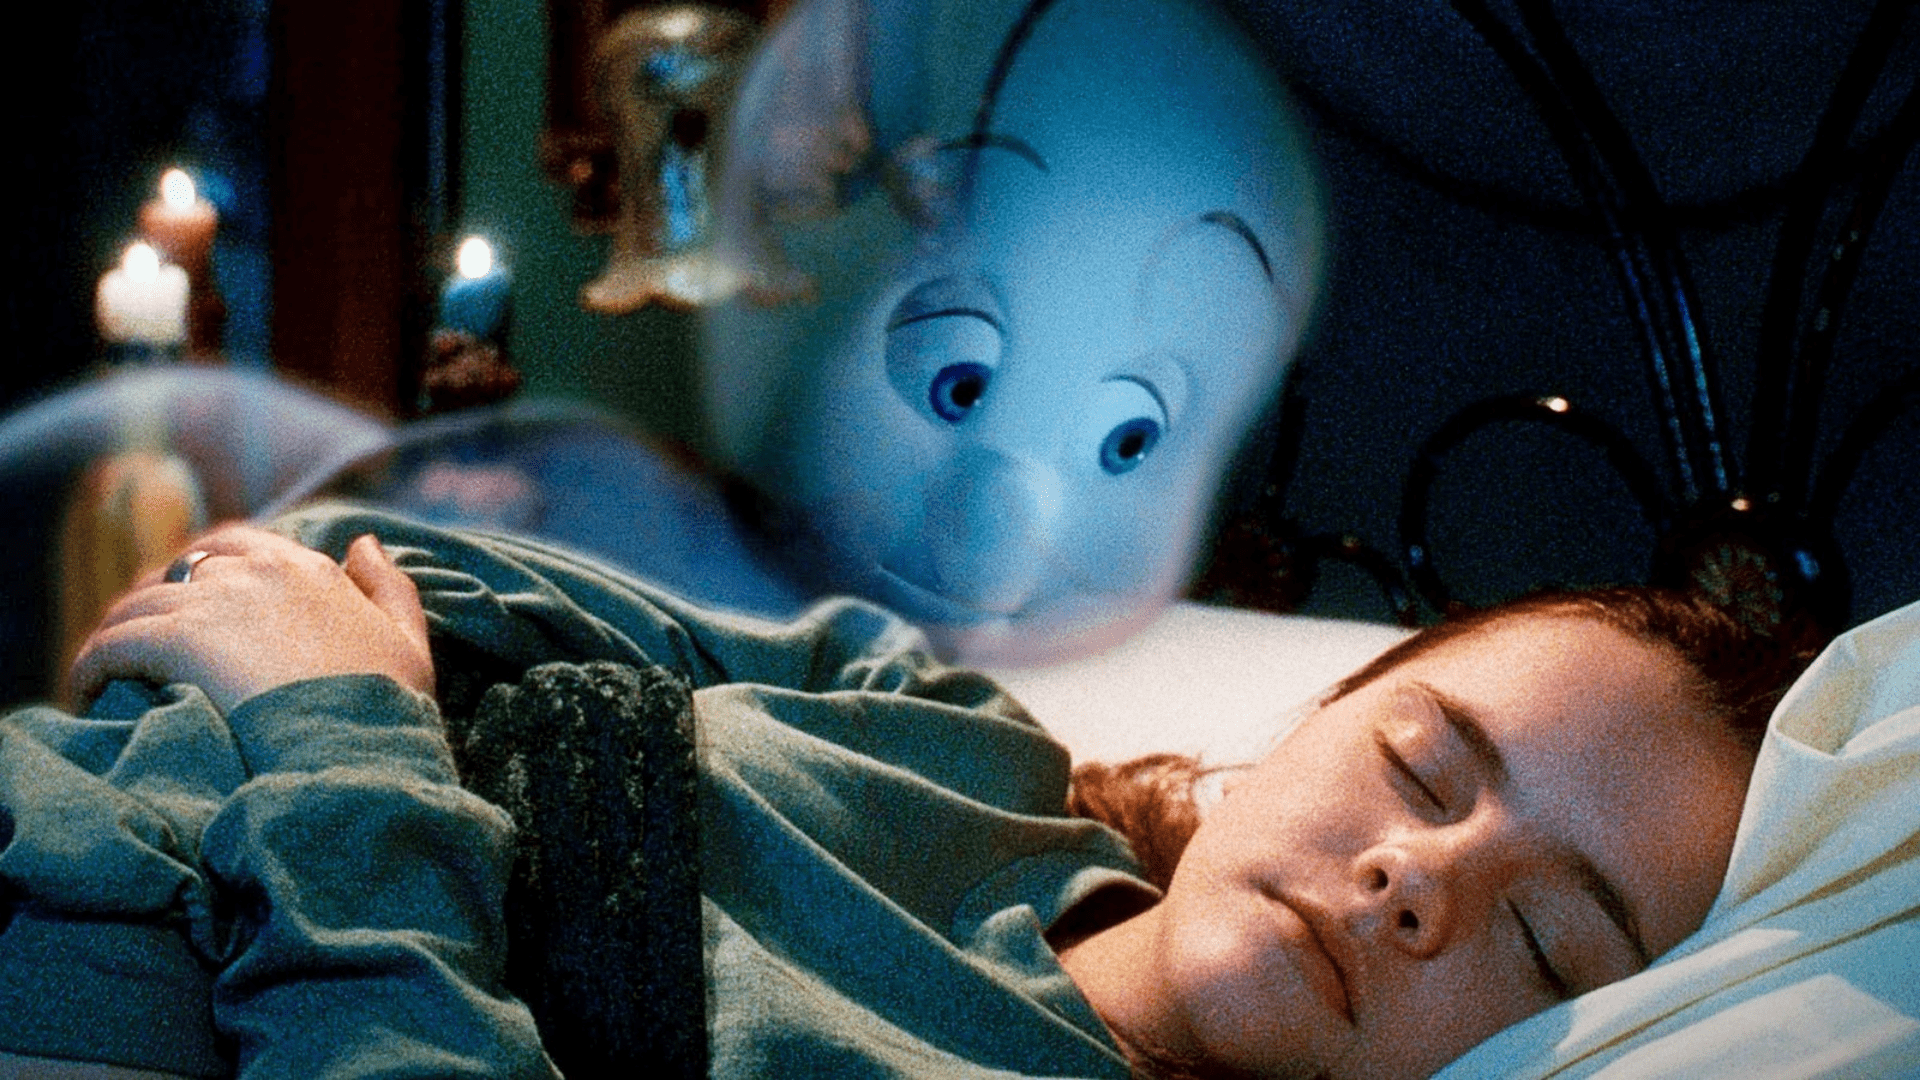 67 Casper Facts (1995) To Get You Ready For Halloween - Casper Facts (1995)